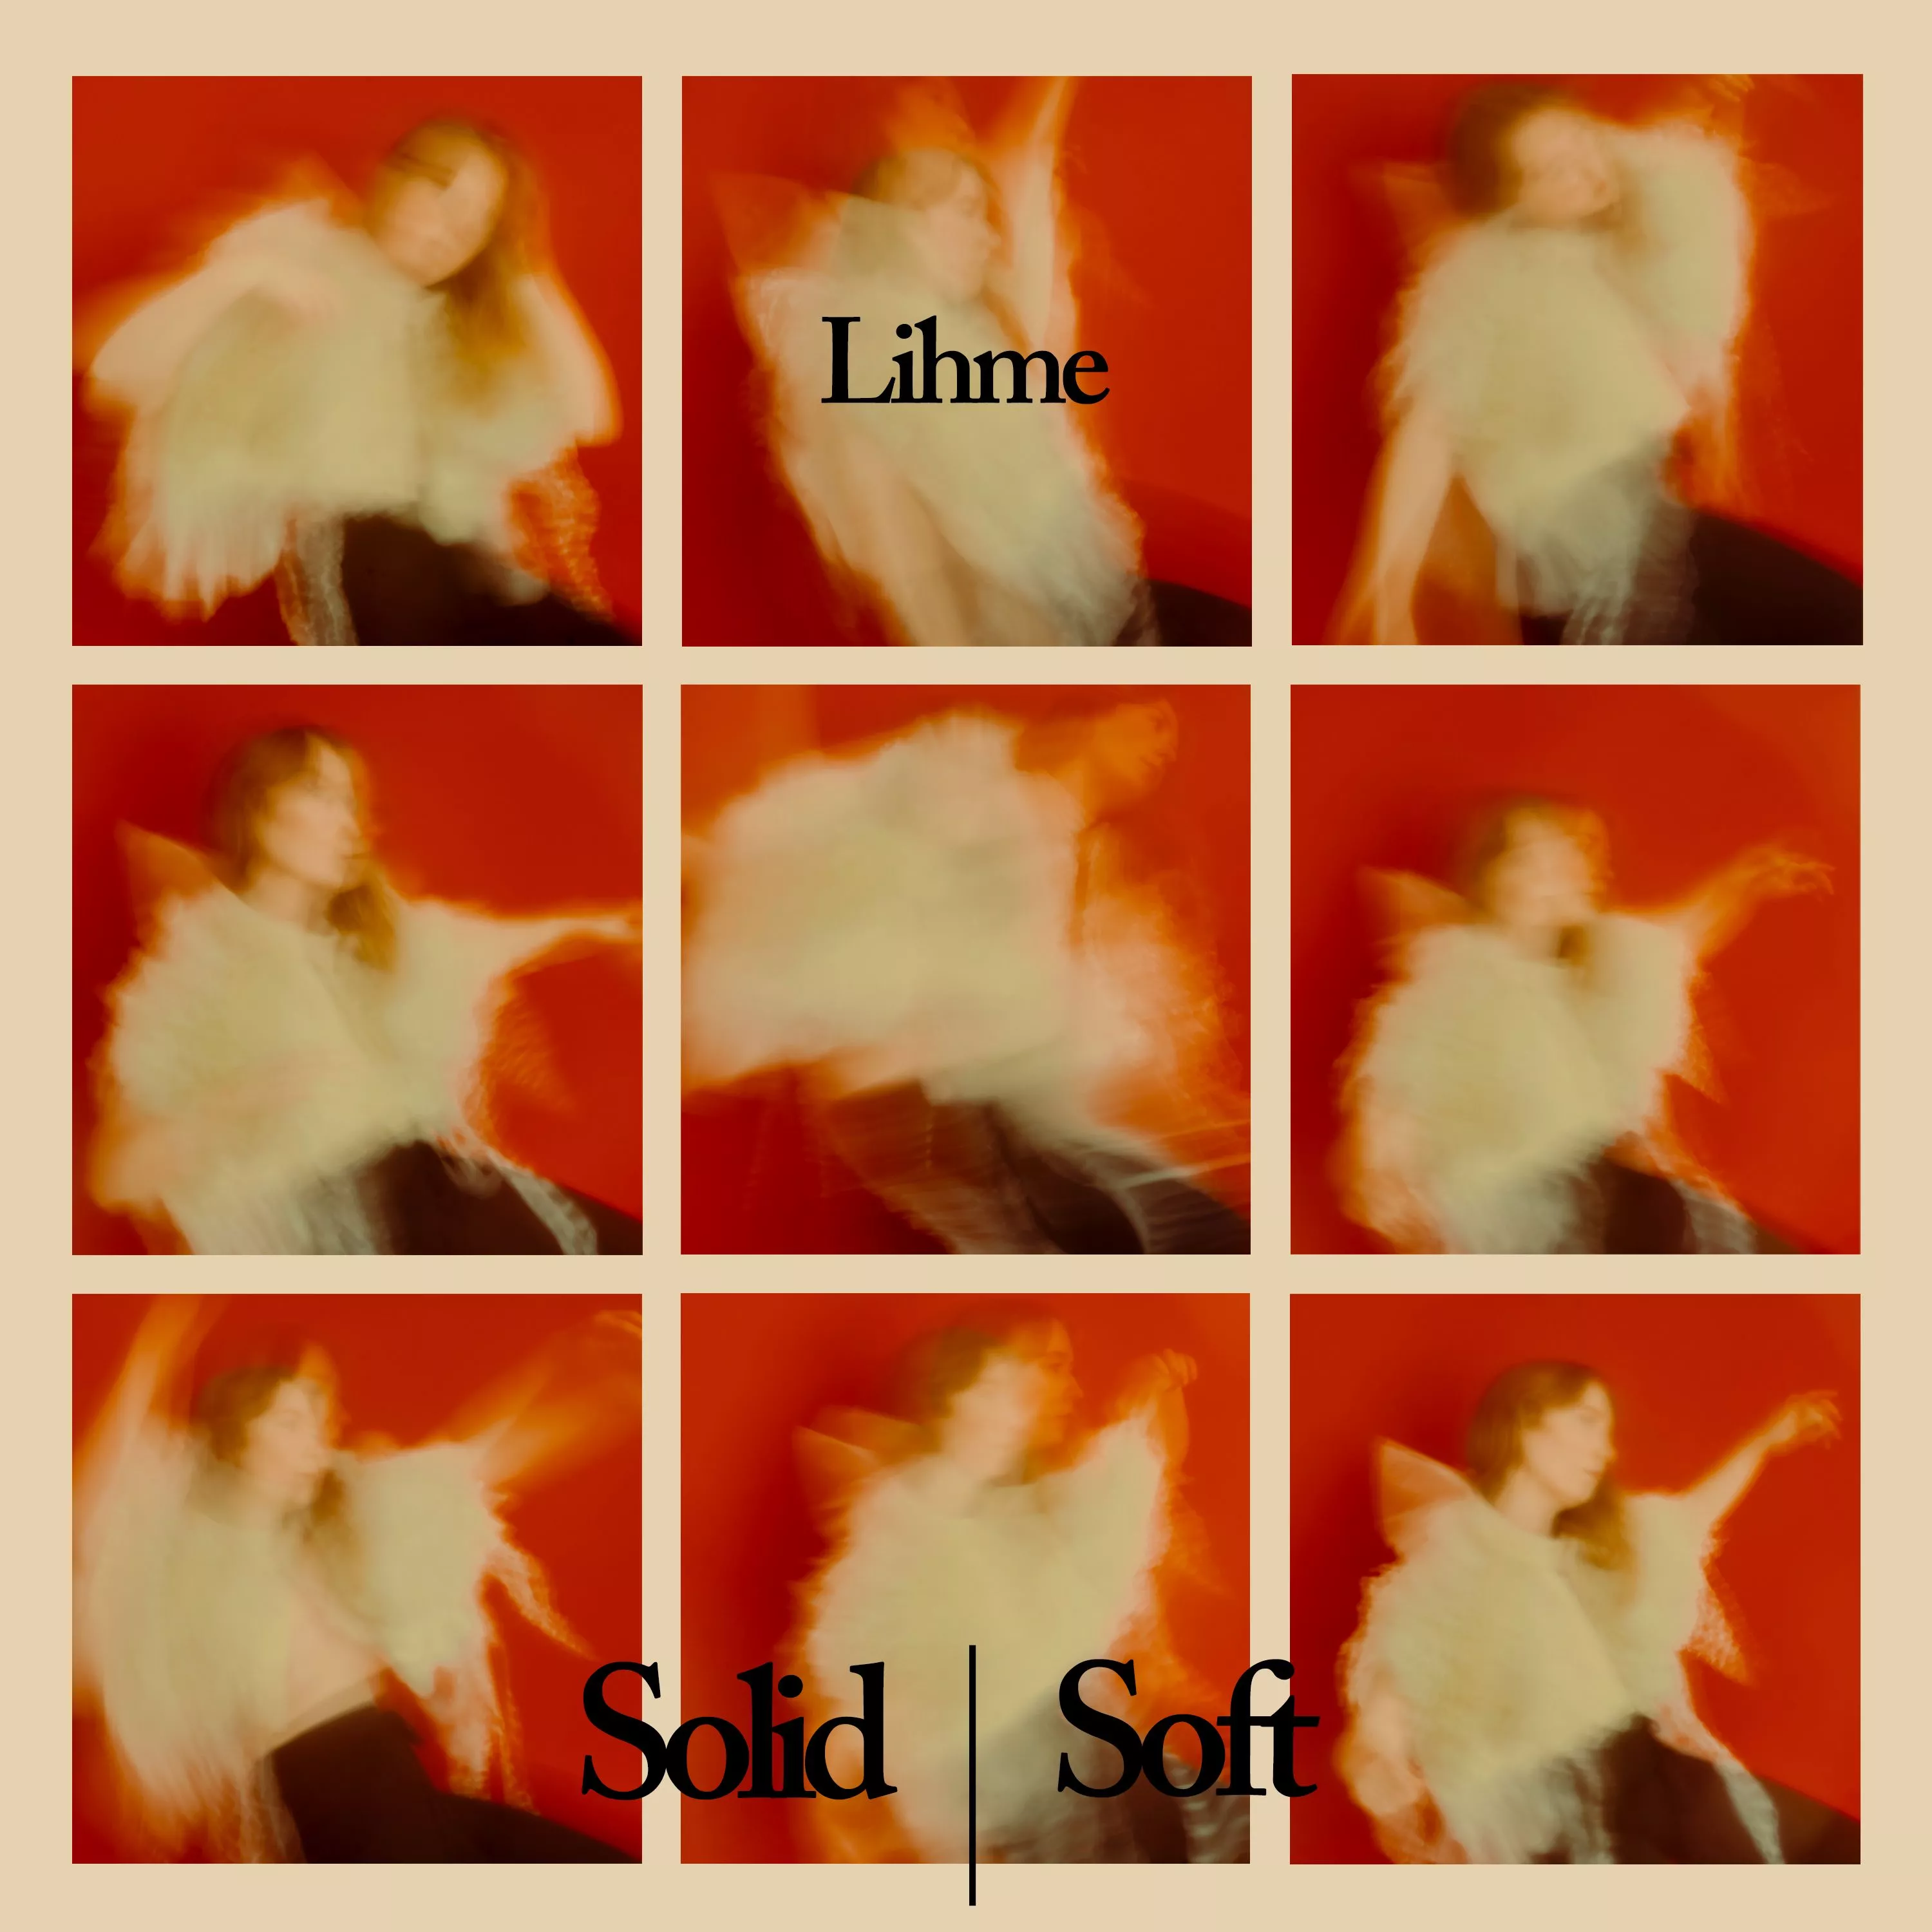 Solid/Soft - Lihme